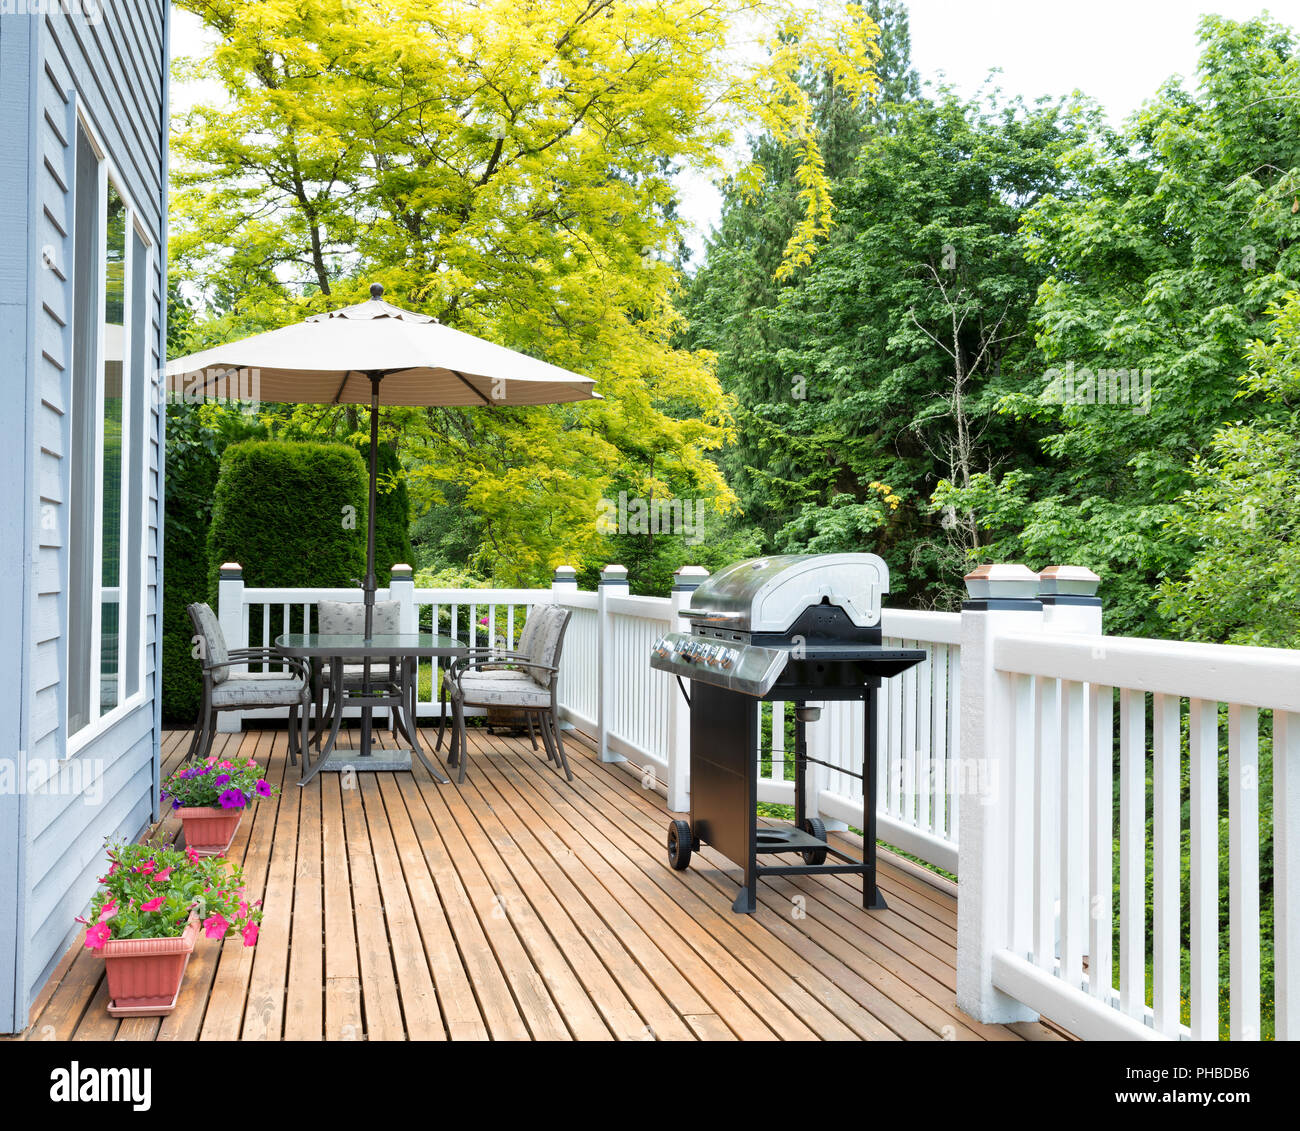 Home deck and patio with outdoor furniture and BBQ cooker Stock Photo